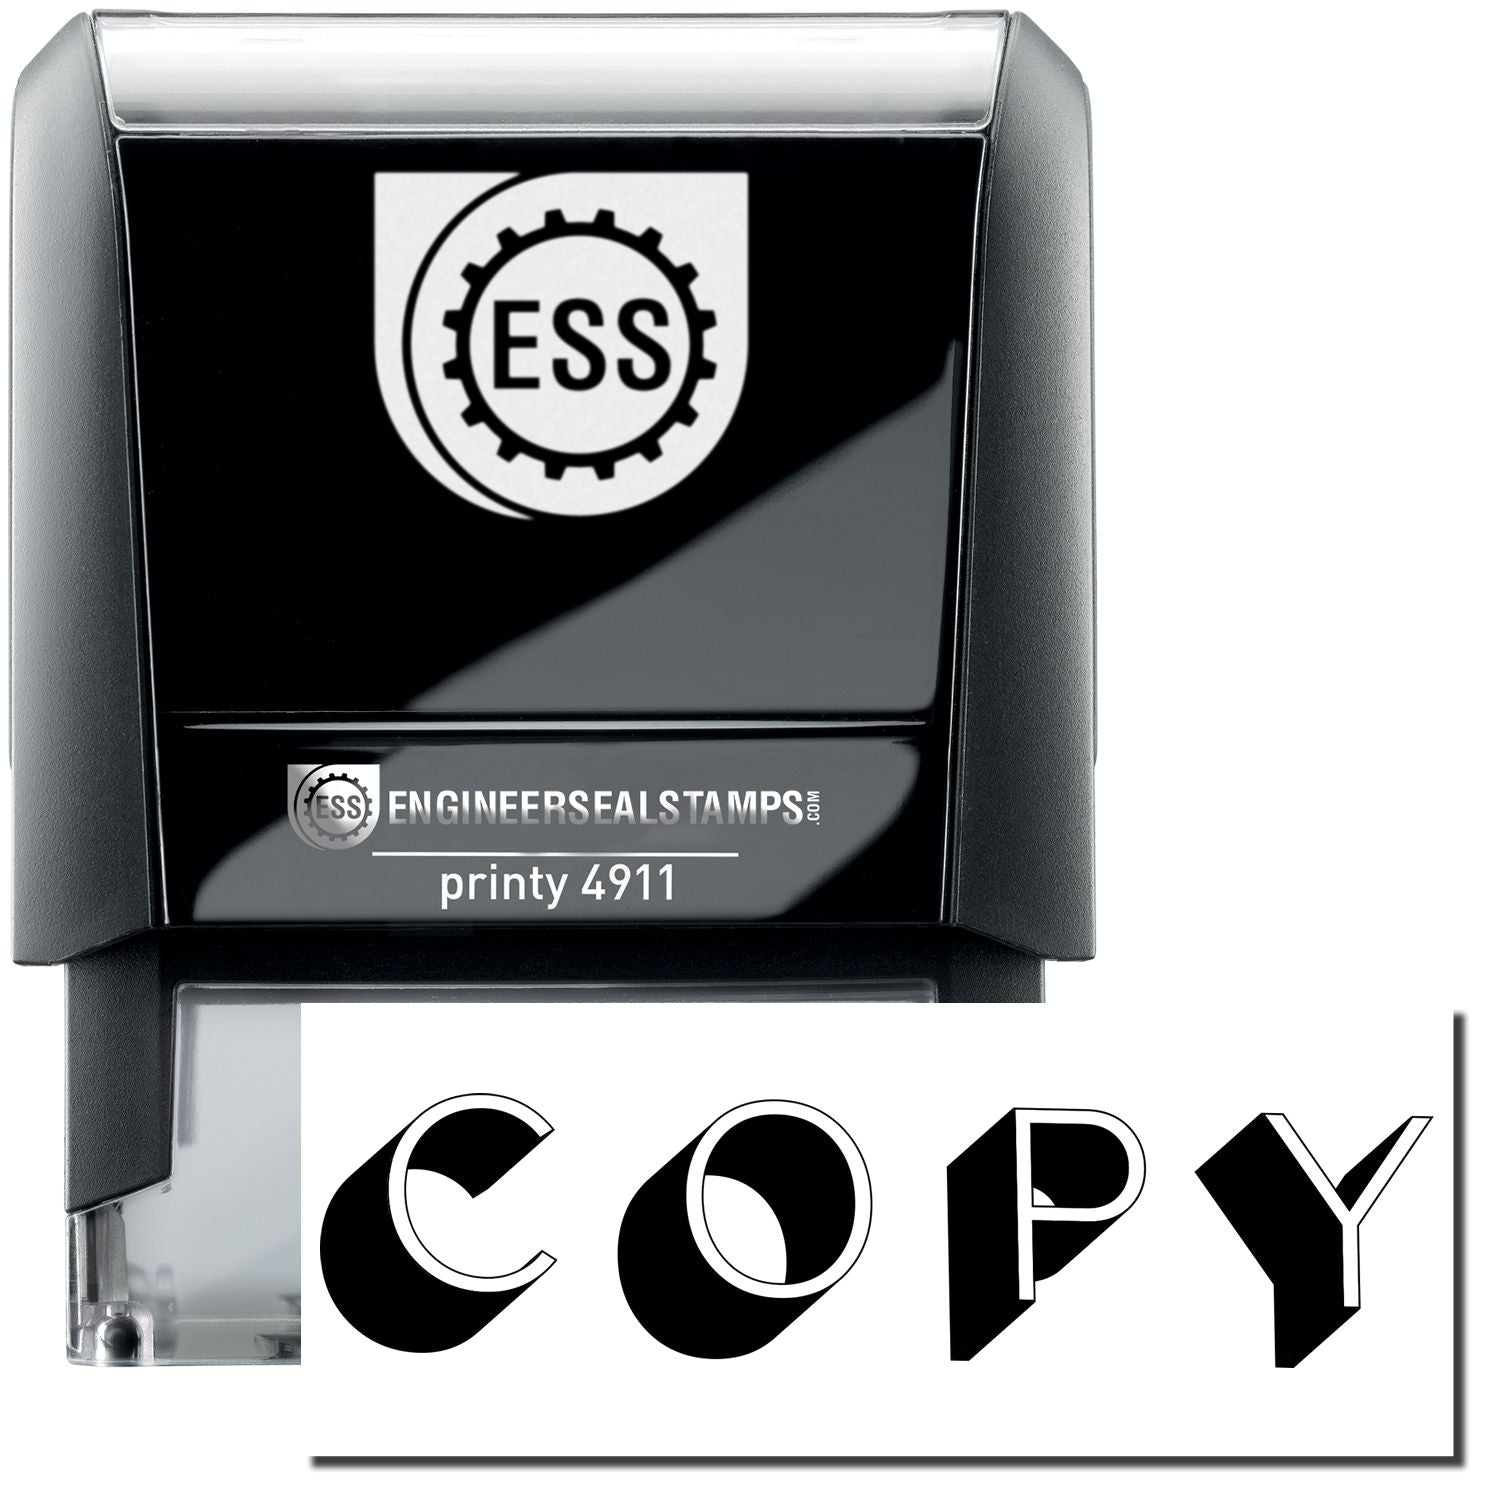 A self-inking stamp with a stamped image showing how the text "COPY" with a shadow behind the word is displayed after stamping.